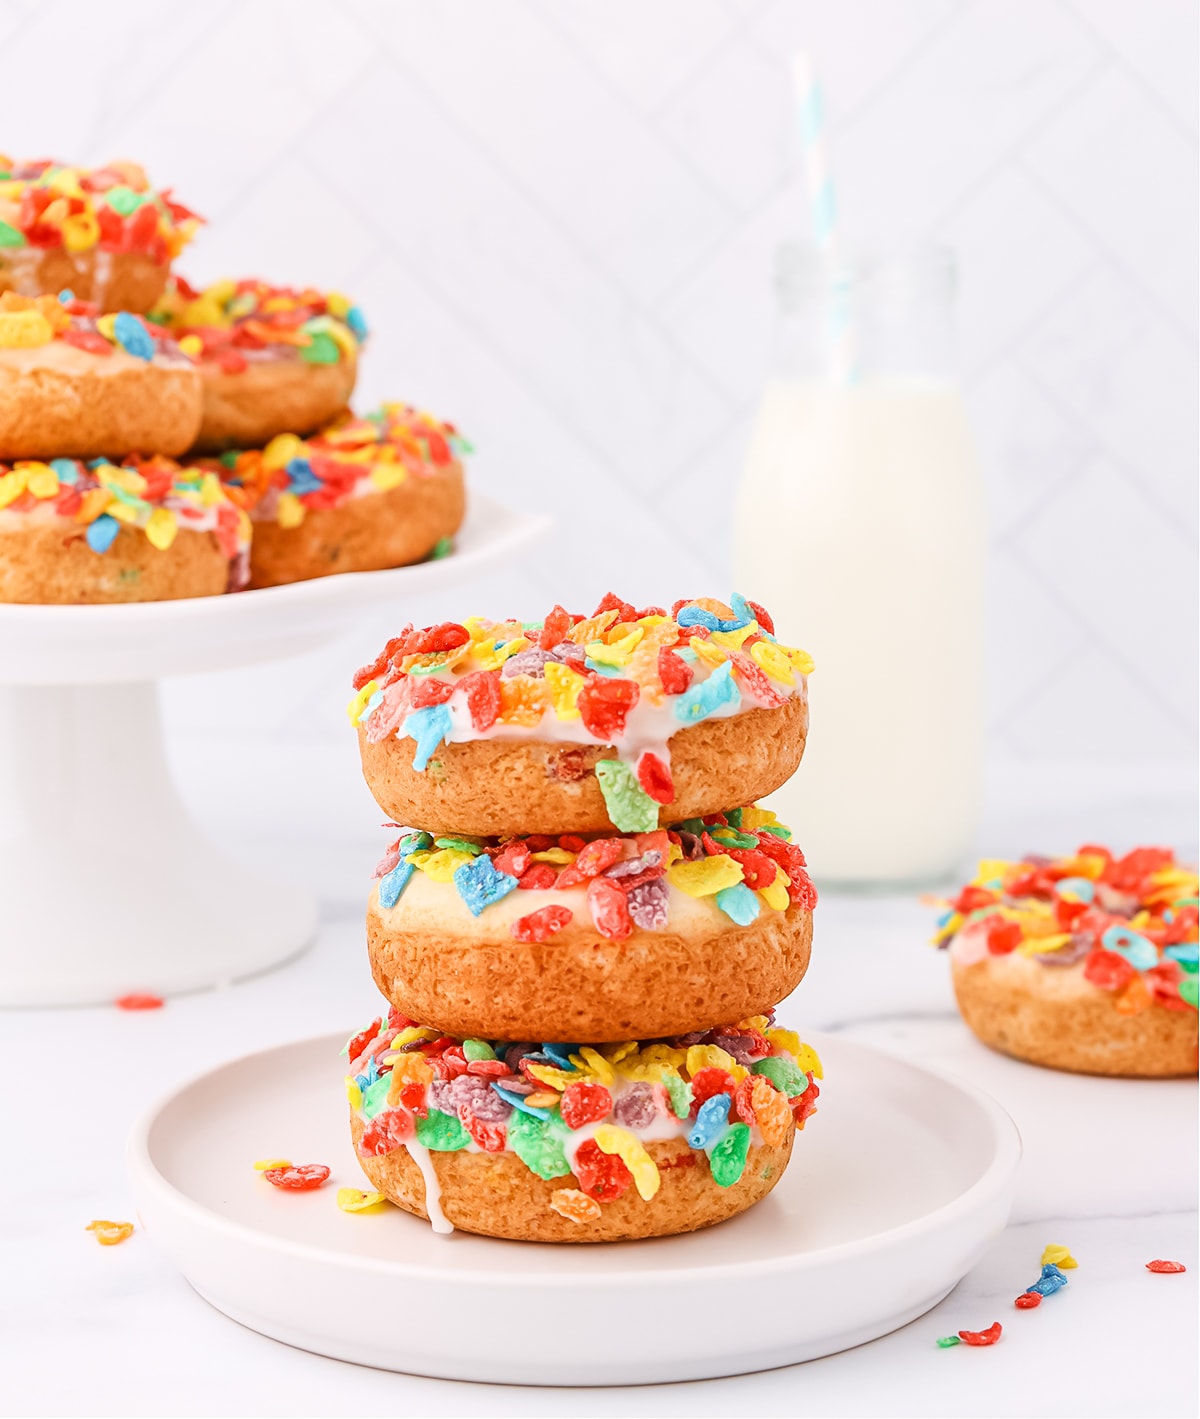 A stack of three fruity pebbles donuts on top of each other on a white plate with a cake stand holding more donuts and glass of milk in the background.